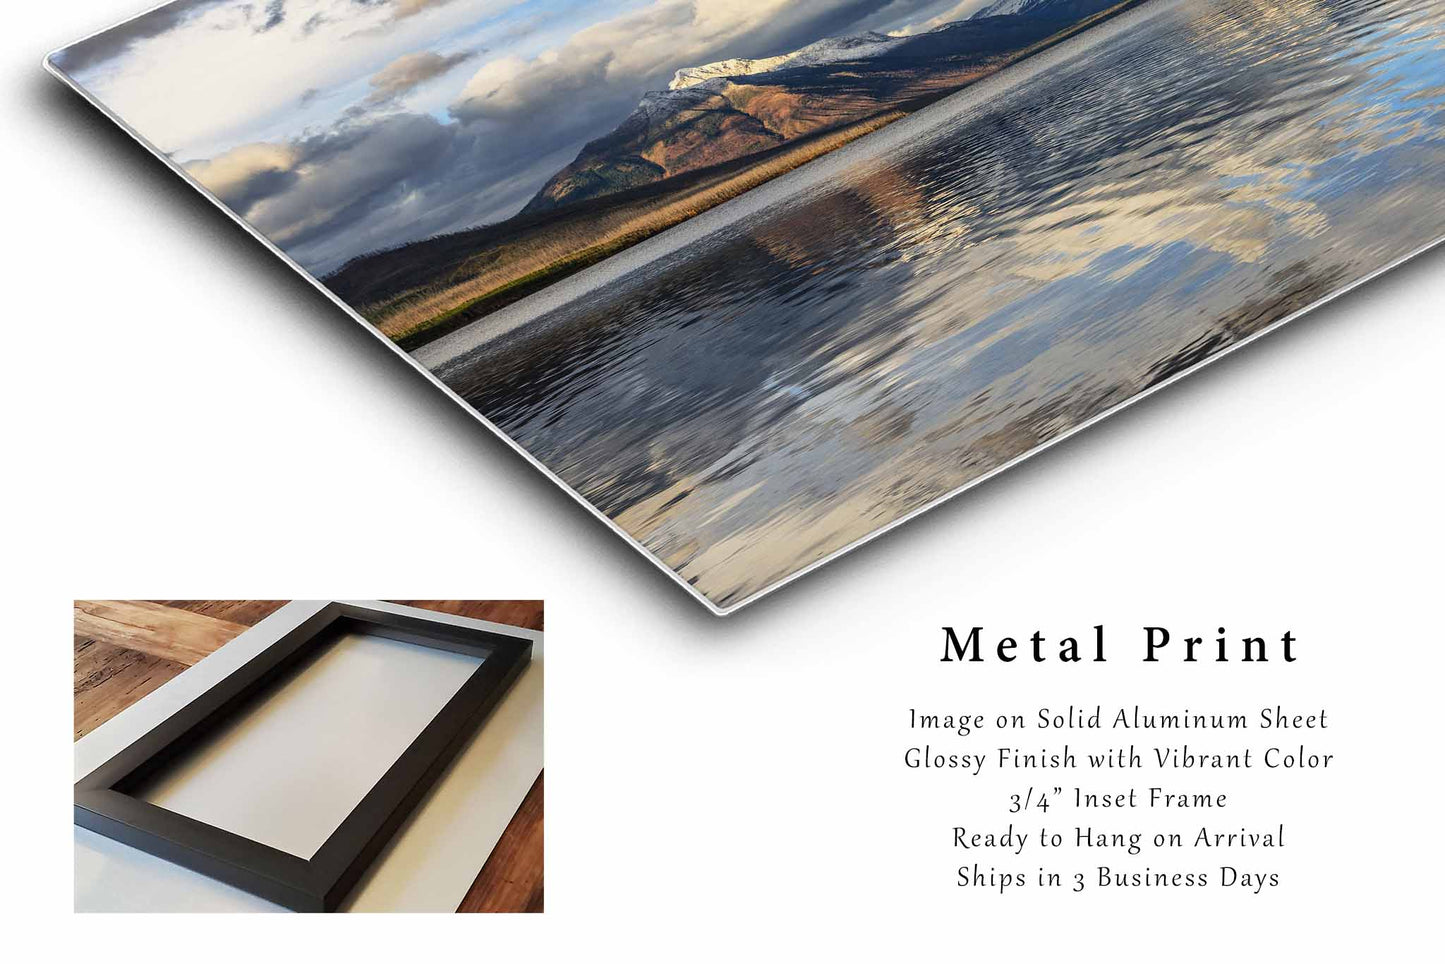 Glacier National Park Metal Print (Ready to Hang) Photo on Aluminum of Snowy Peaks at Lake McDonald on Autumn Day in Montana Rocky Mountain Wall Art Nature Decor